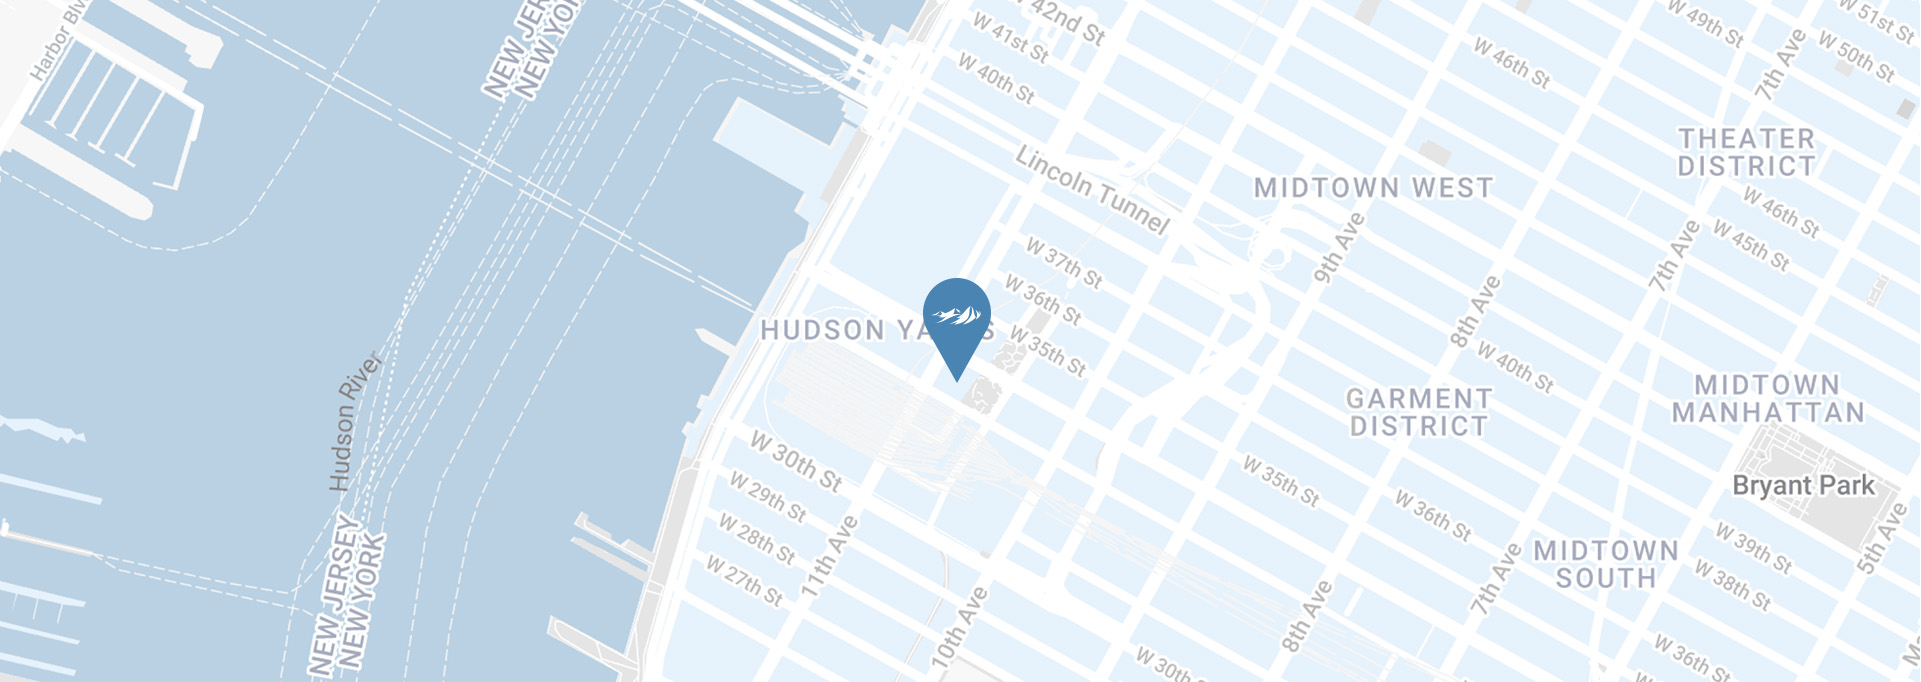 map showing the New York location on 34th street between 10th and 11th avenues